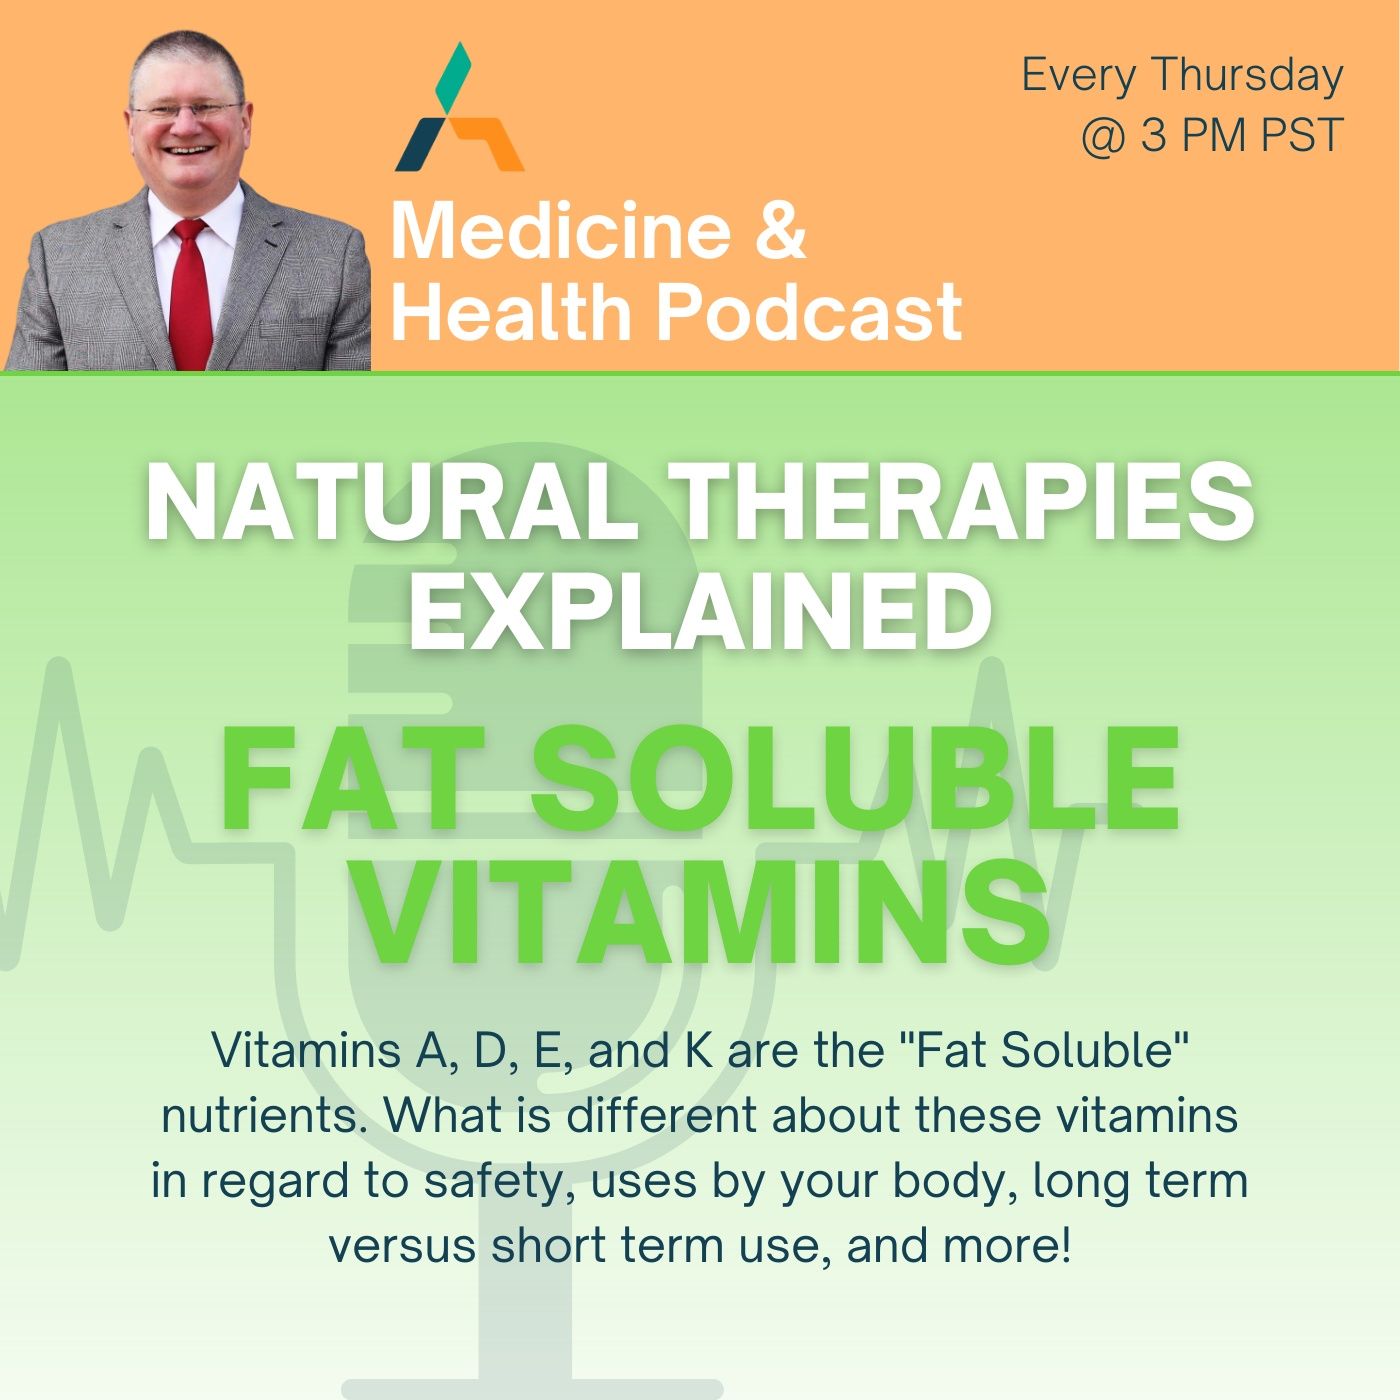 FAT SOLUBLE VITAMINS